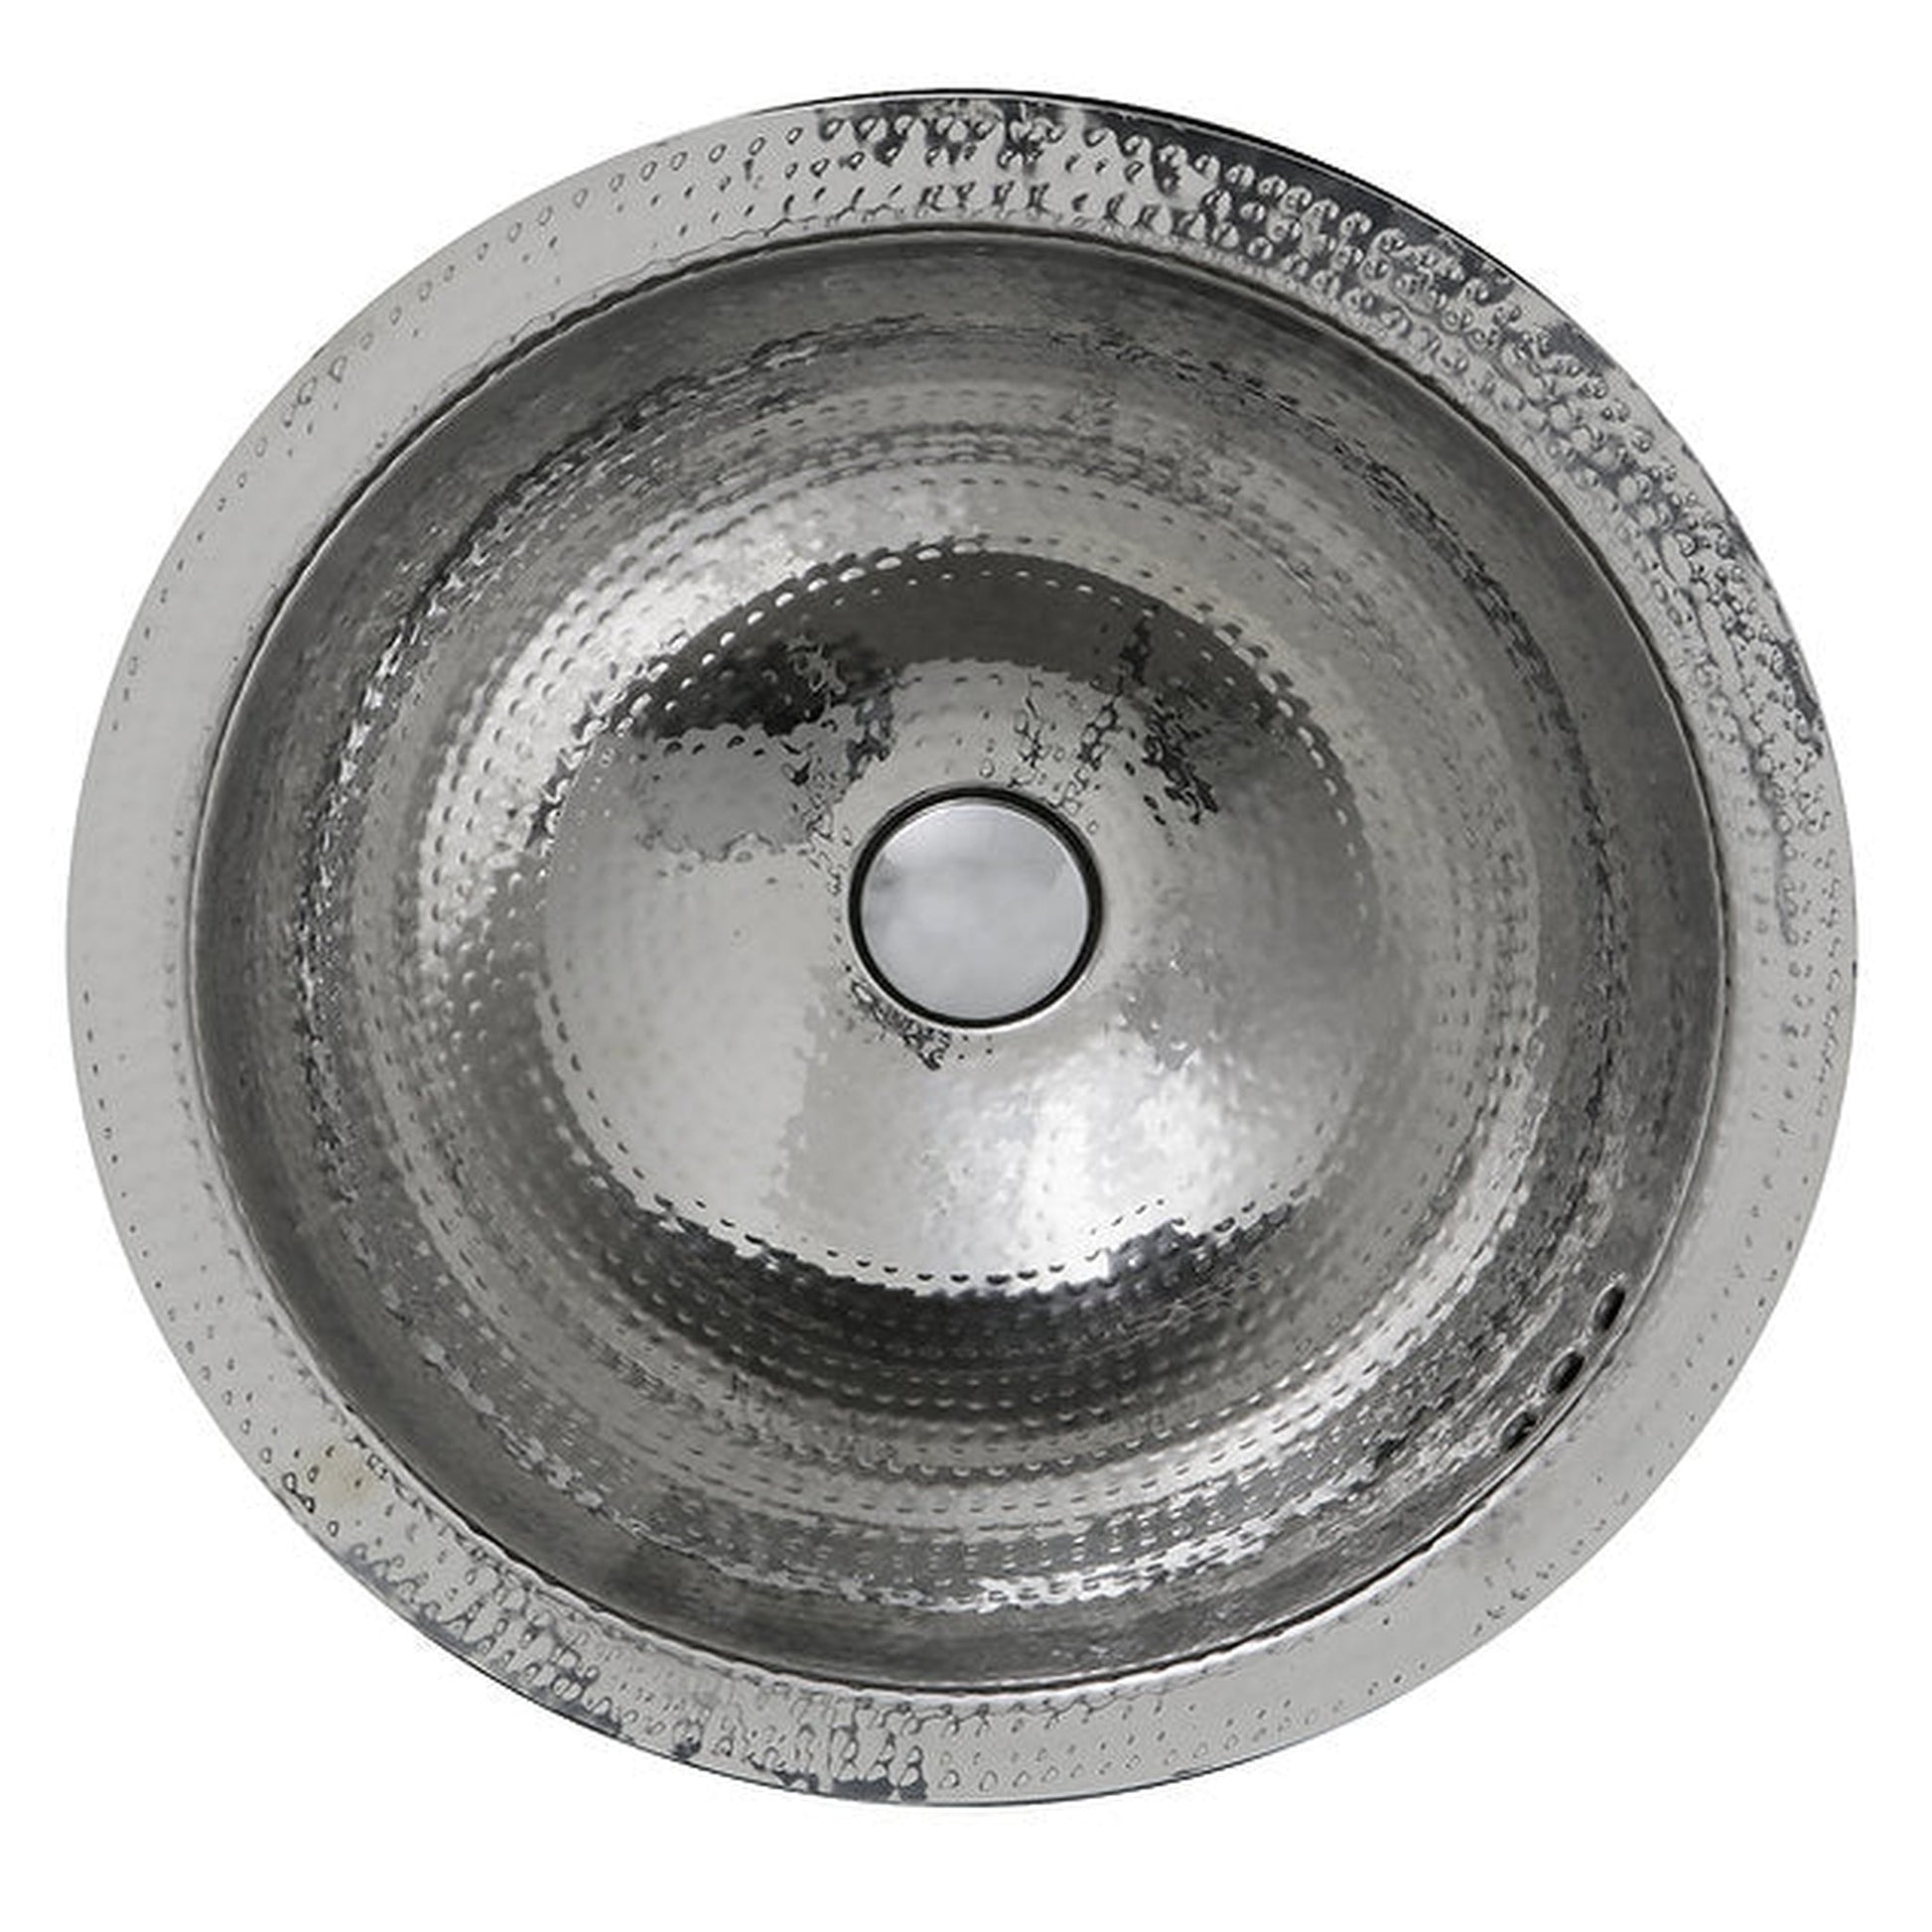 Nantucket Sinks Brightwork Home 17" Round Hand Hammered Polished Stainless Steel Undermount Sink With Overflow